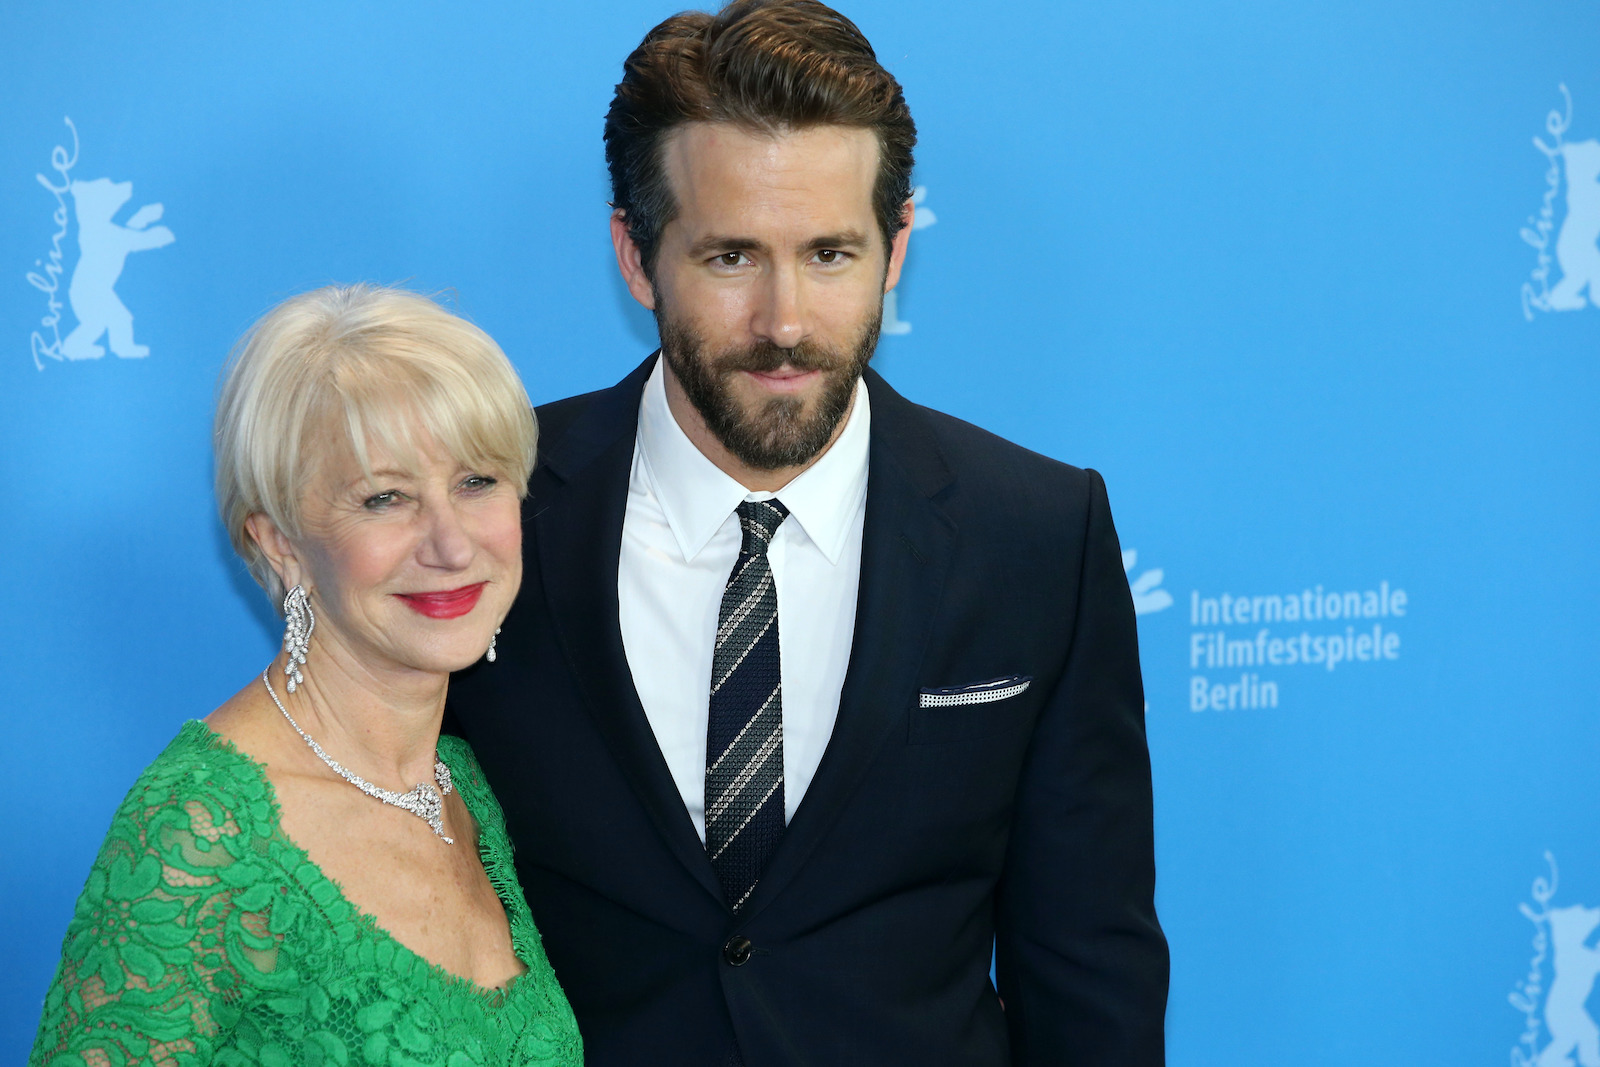 Helen Mirren and Ryan Reynolds smile on the red carpet during 'Woman in Gold' premiere